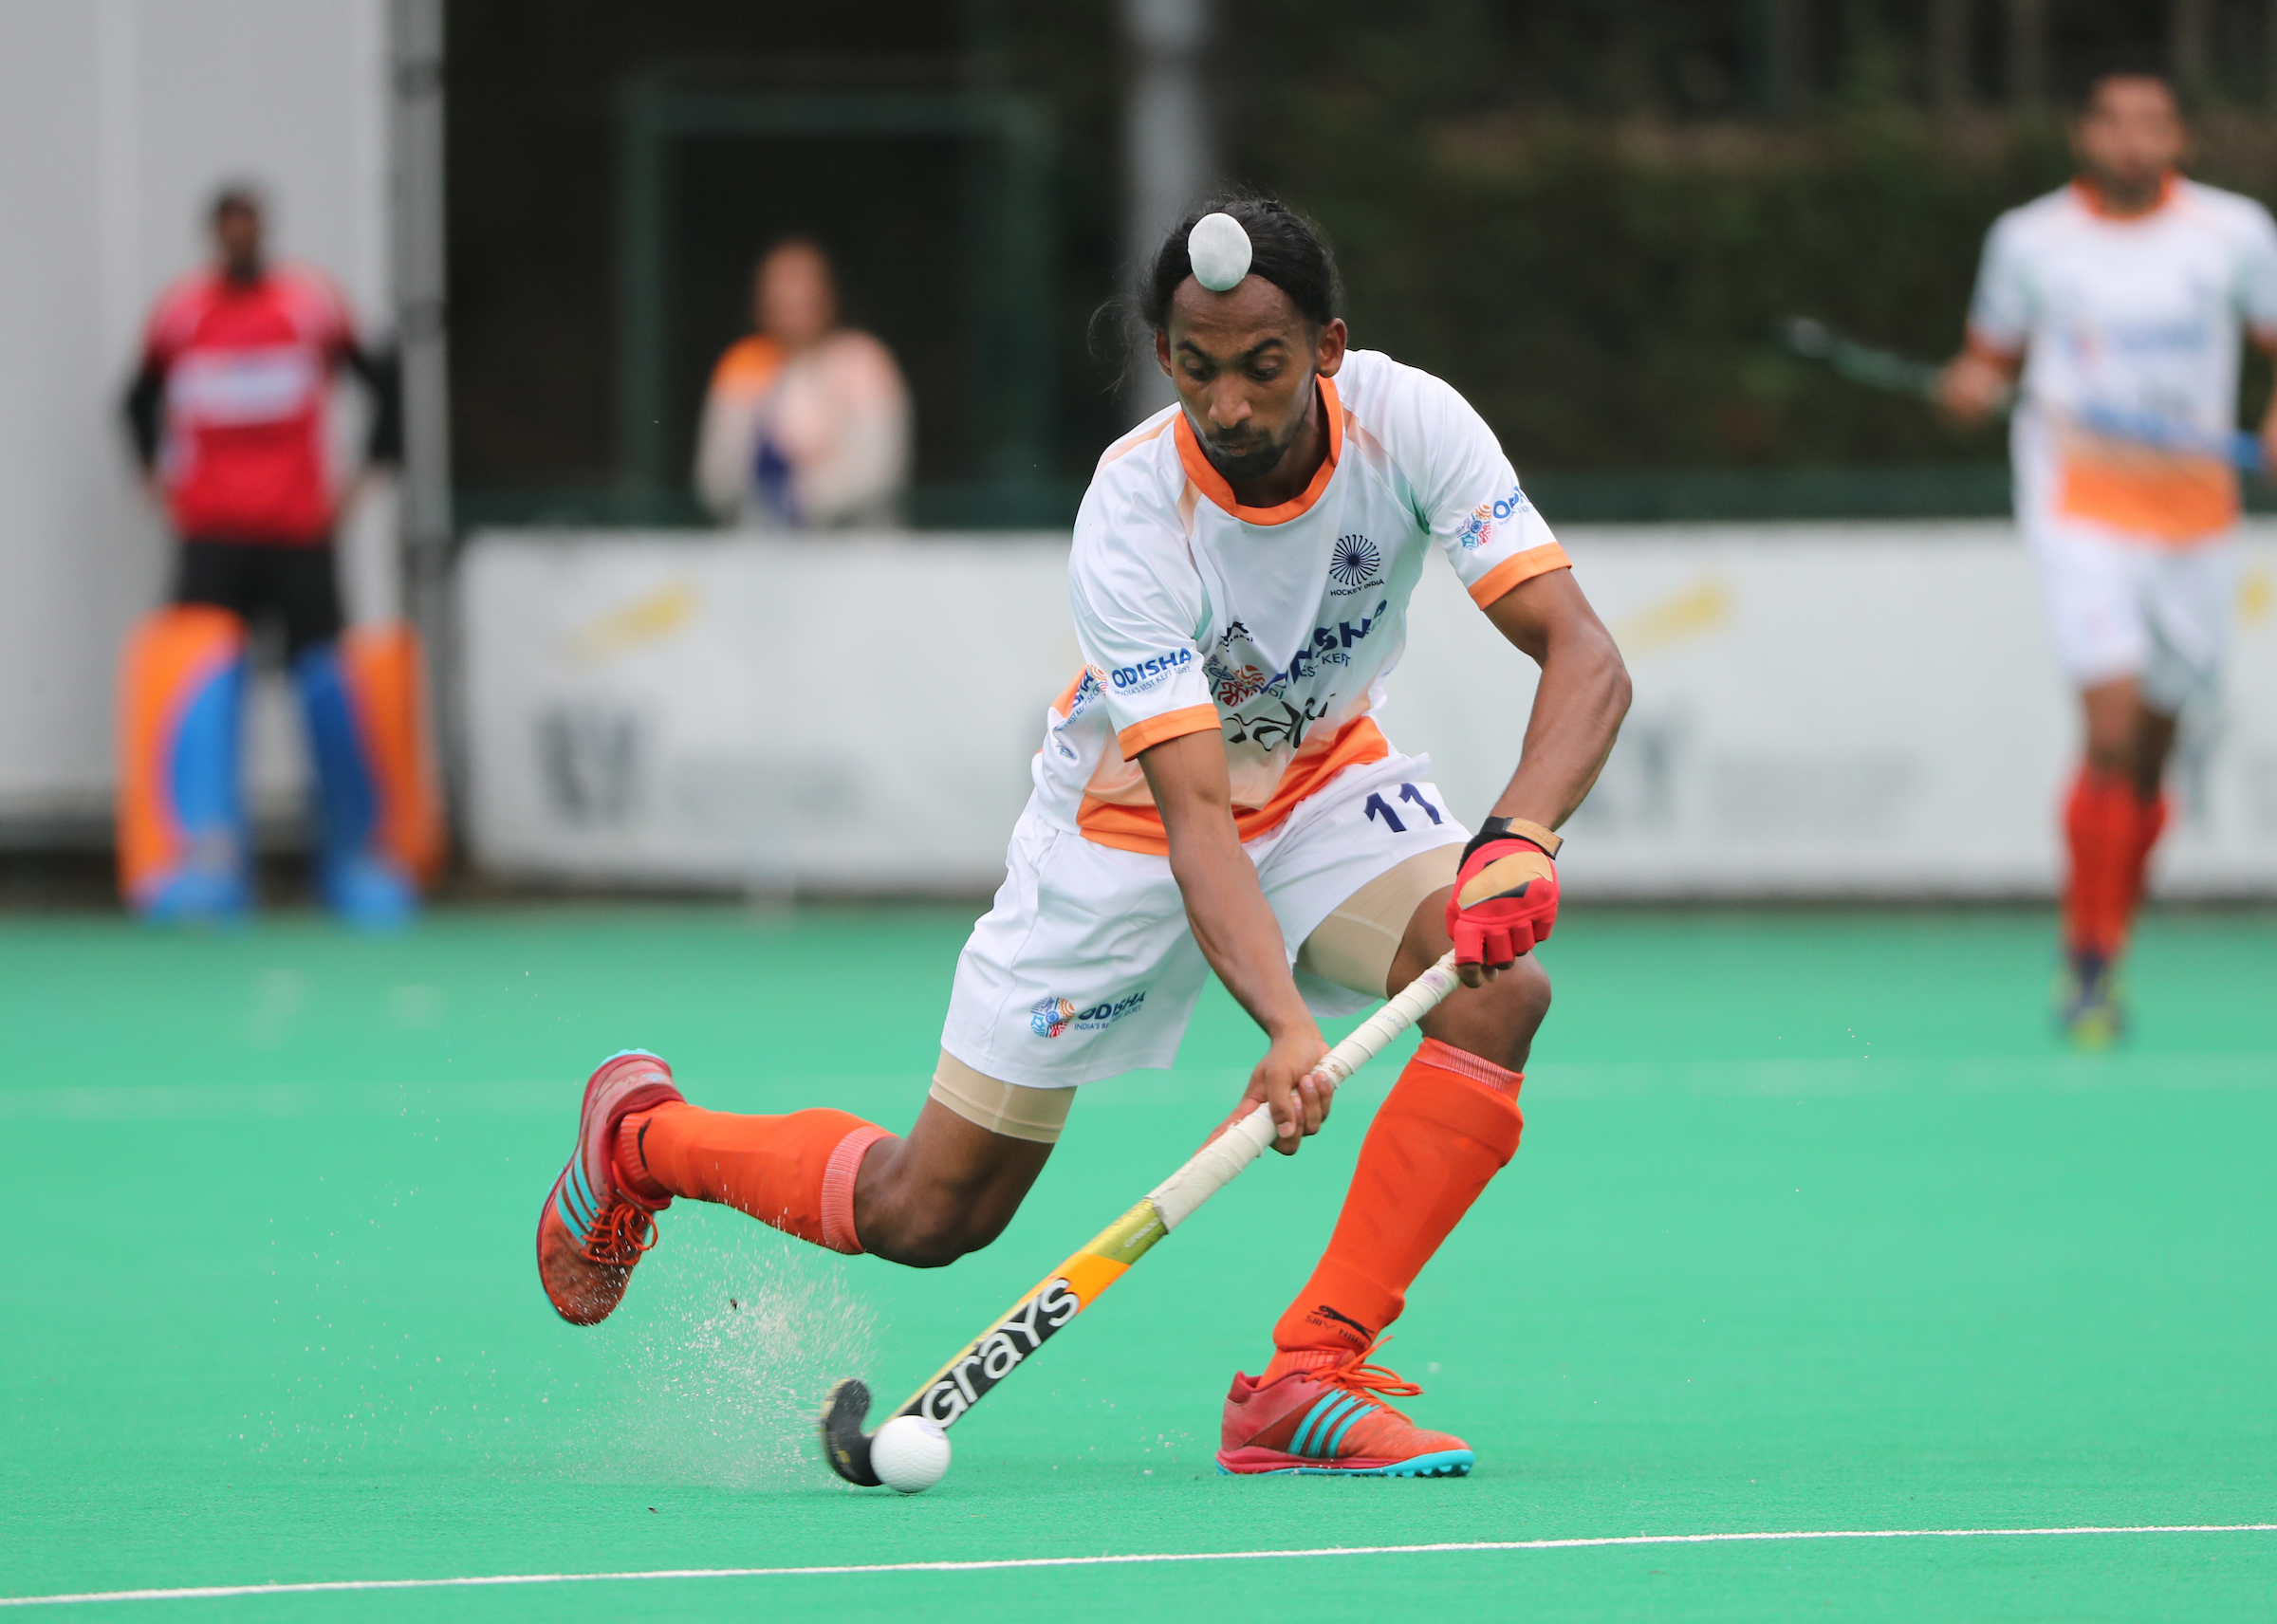 Hockey World Cup | Hardik Singh - The shining youngster of Indian midfield